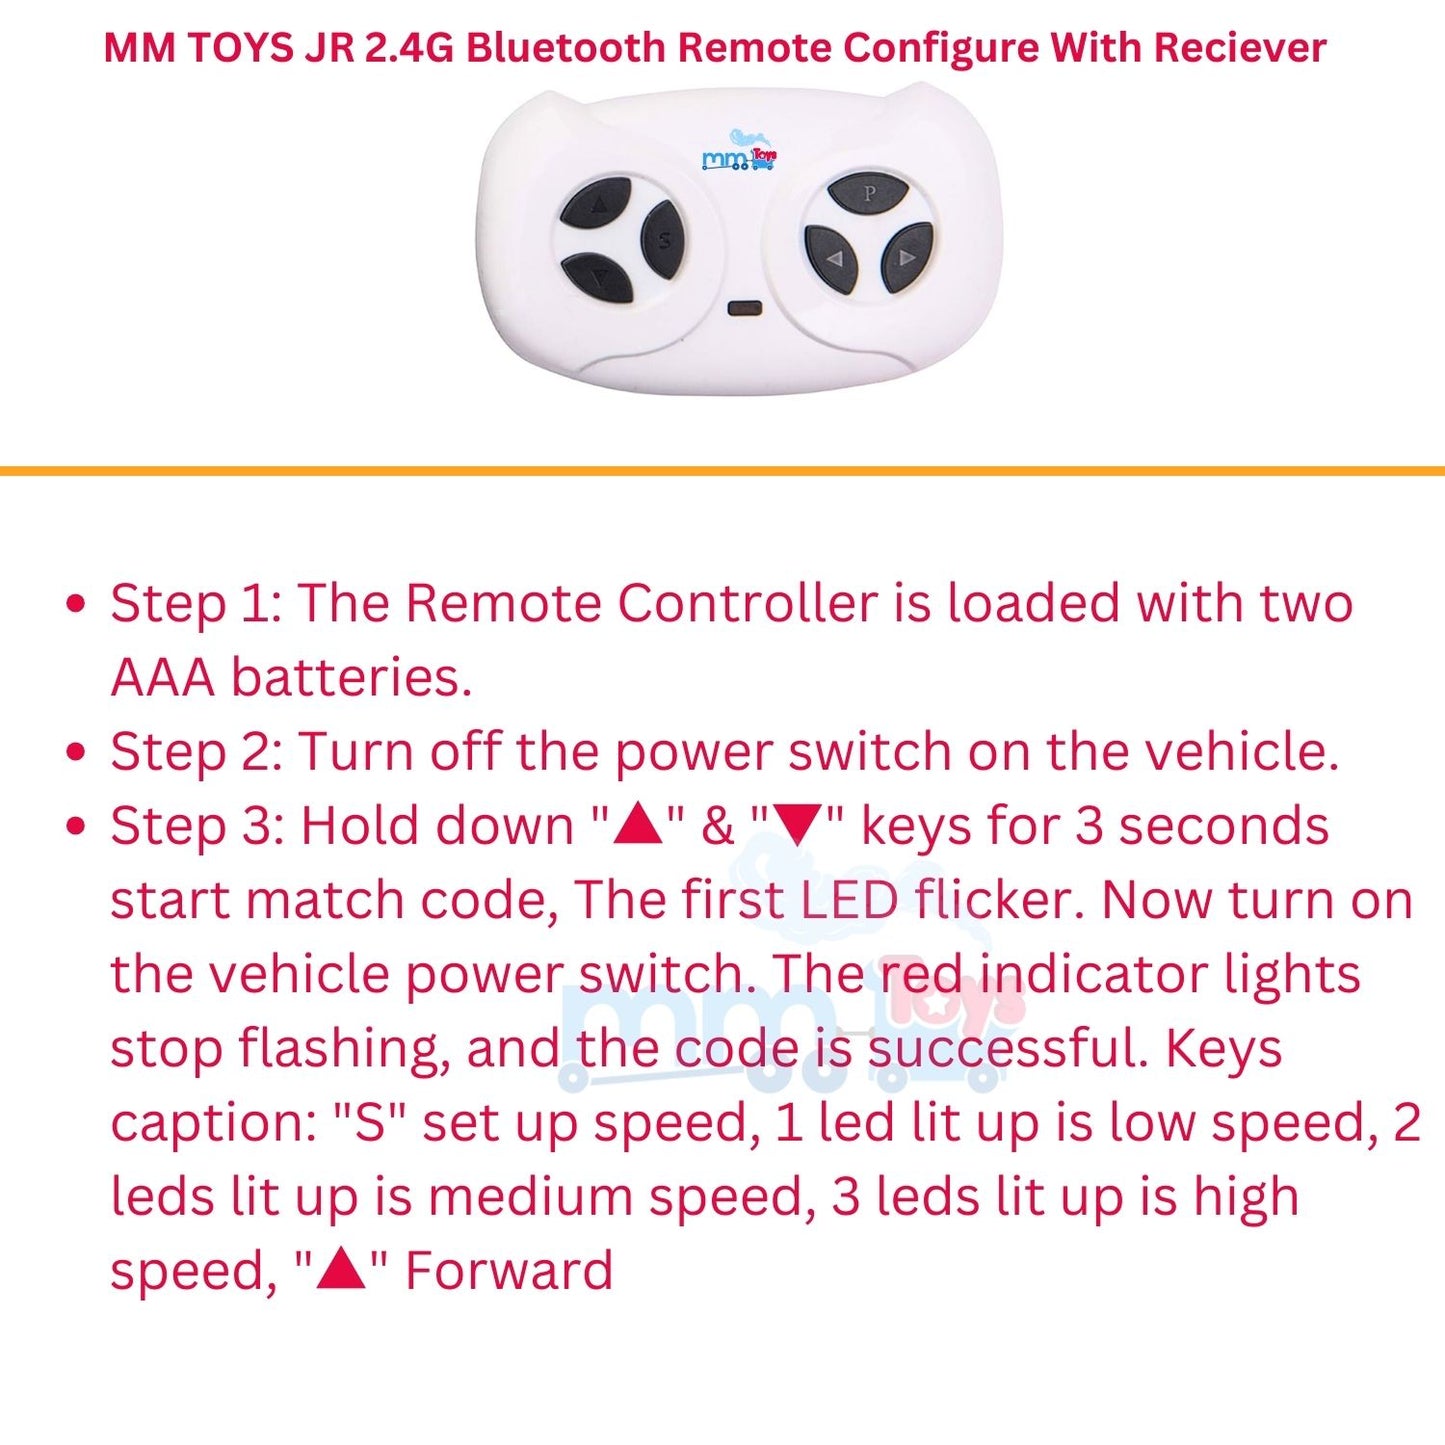 MM TOYS JR 2.4G Bluetooth Remote Control For Kids Electric Car Ride On, 3 Speed Control, Compatible With JR1958RX-2S Receiver (Receiver not Included) Replacement Parts Accessories- White